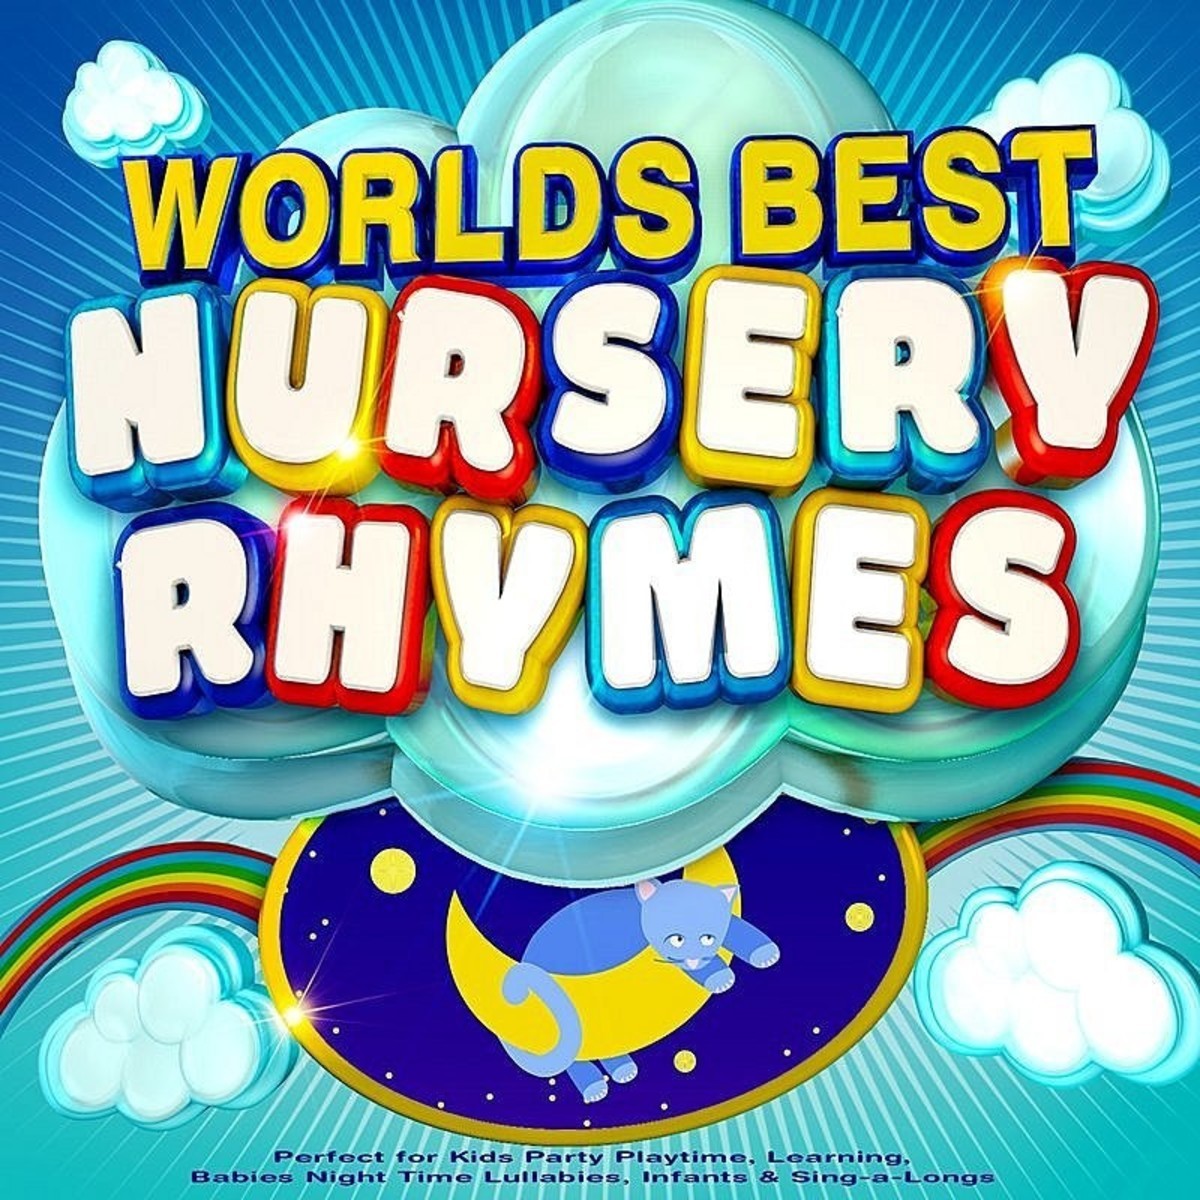 Jack And Jill Lyrics In English Worlds Best Nursery Rhymes The Best Children S Songs Ever Perfect For Kids Party Playtime Learning Babies Night Time Lullabies Infants Sing A Longs Jack And